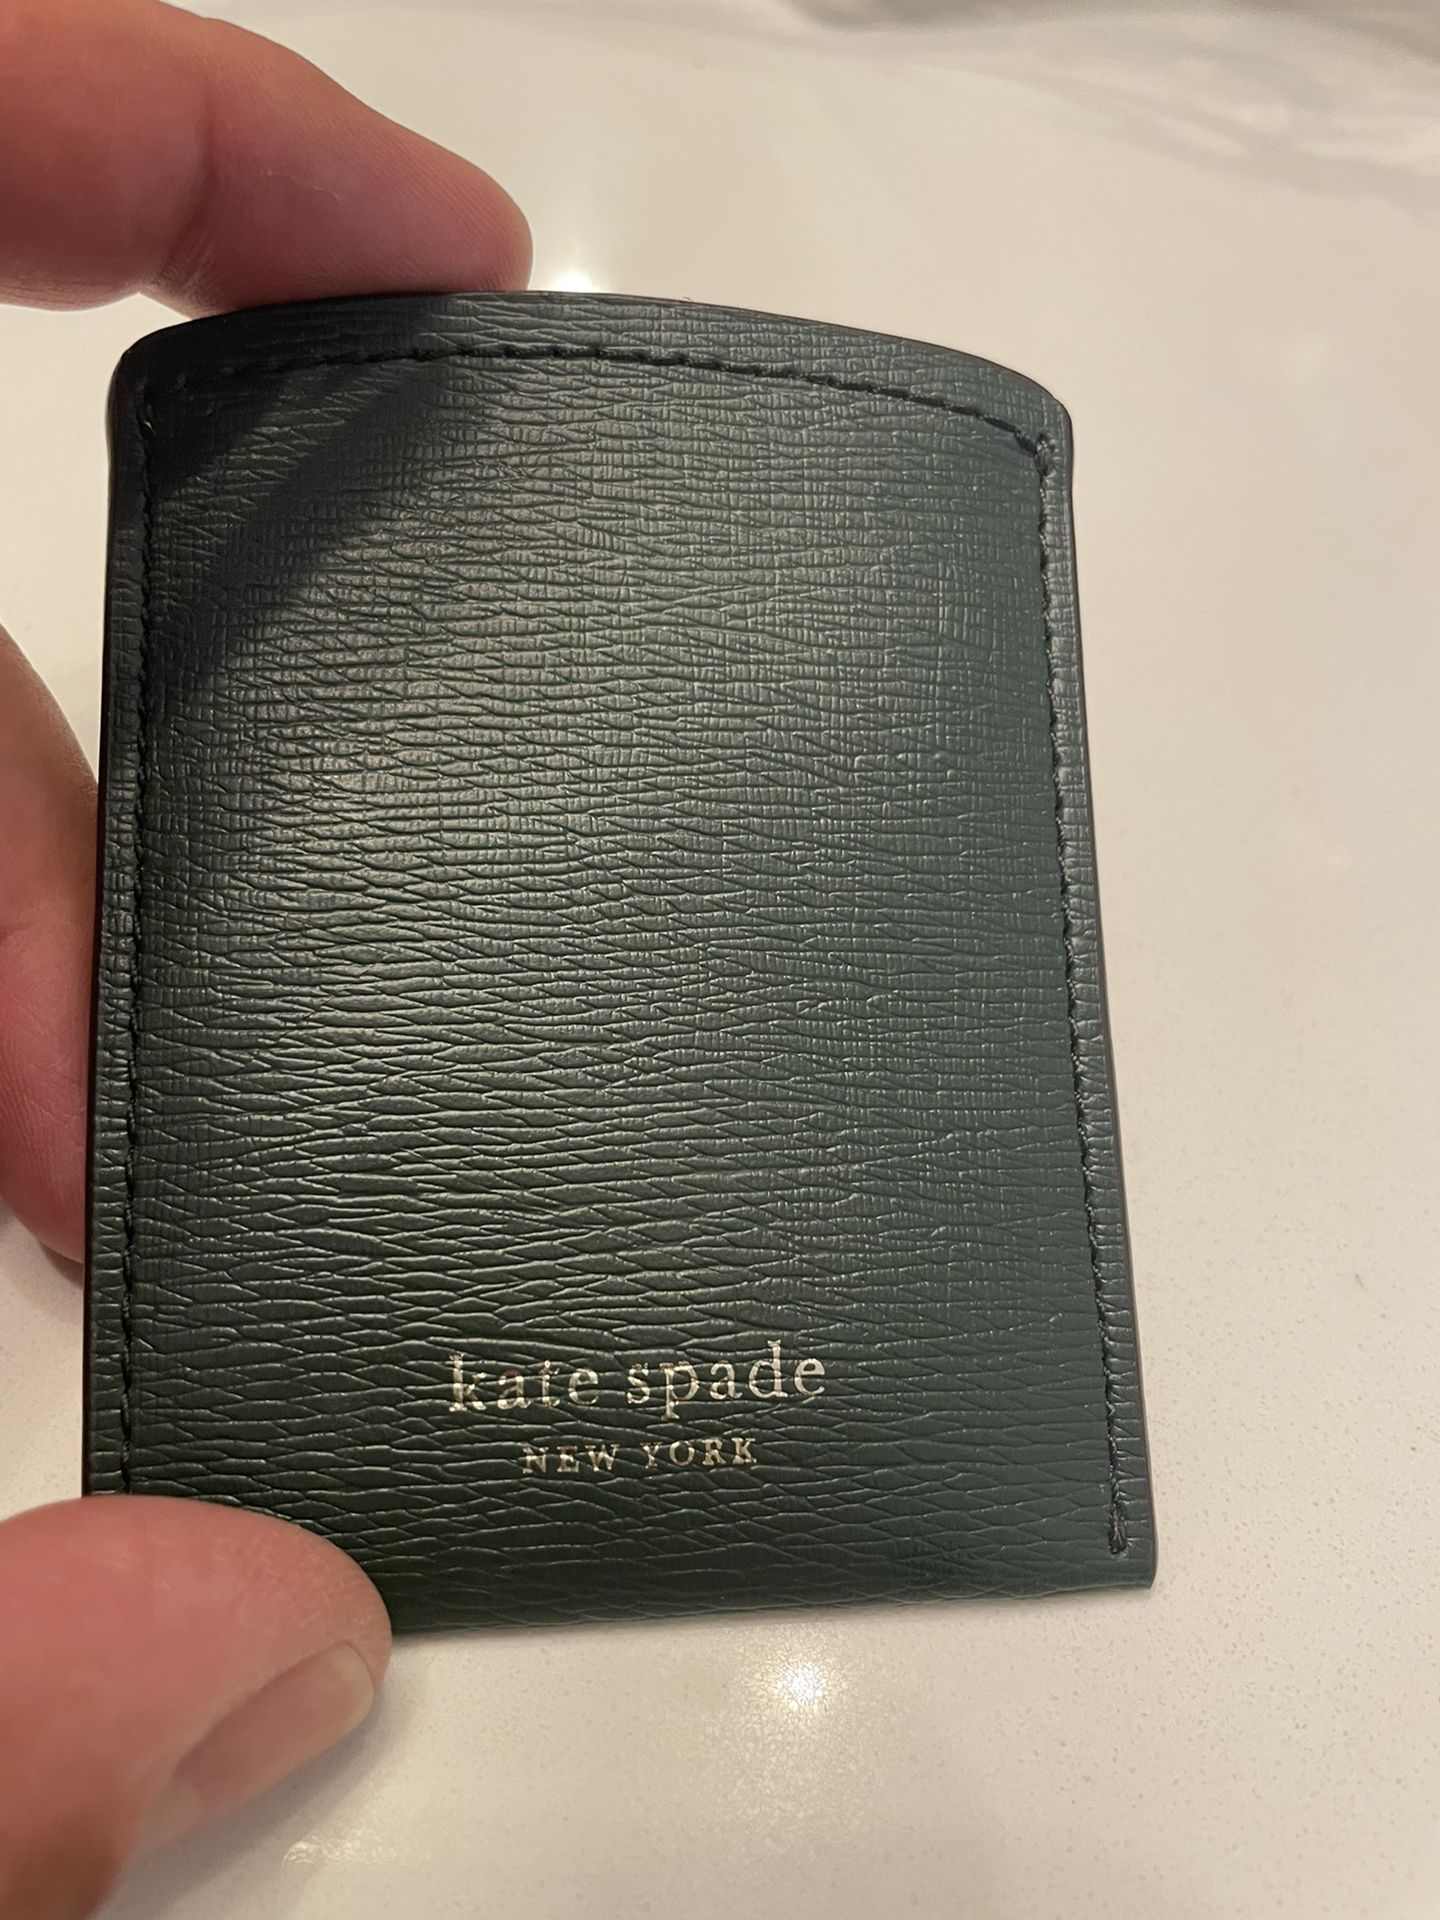 Green Leather Kate Spade Card Holder